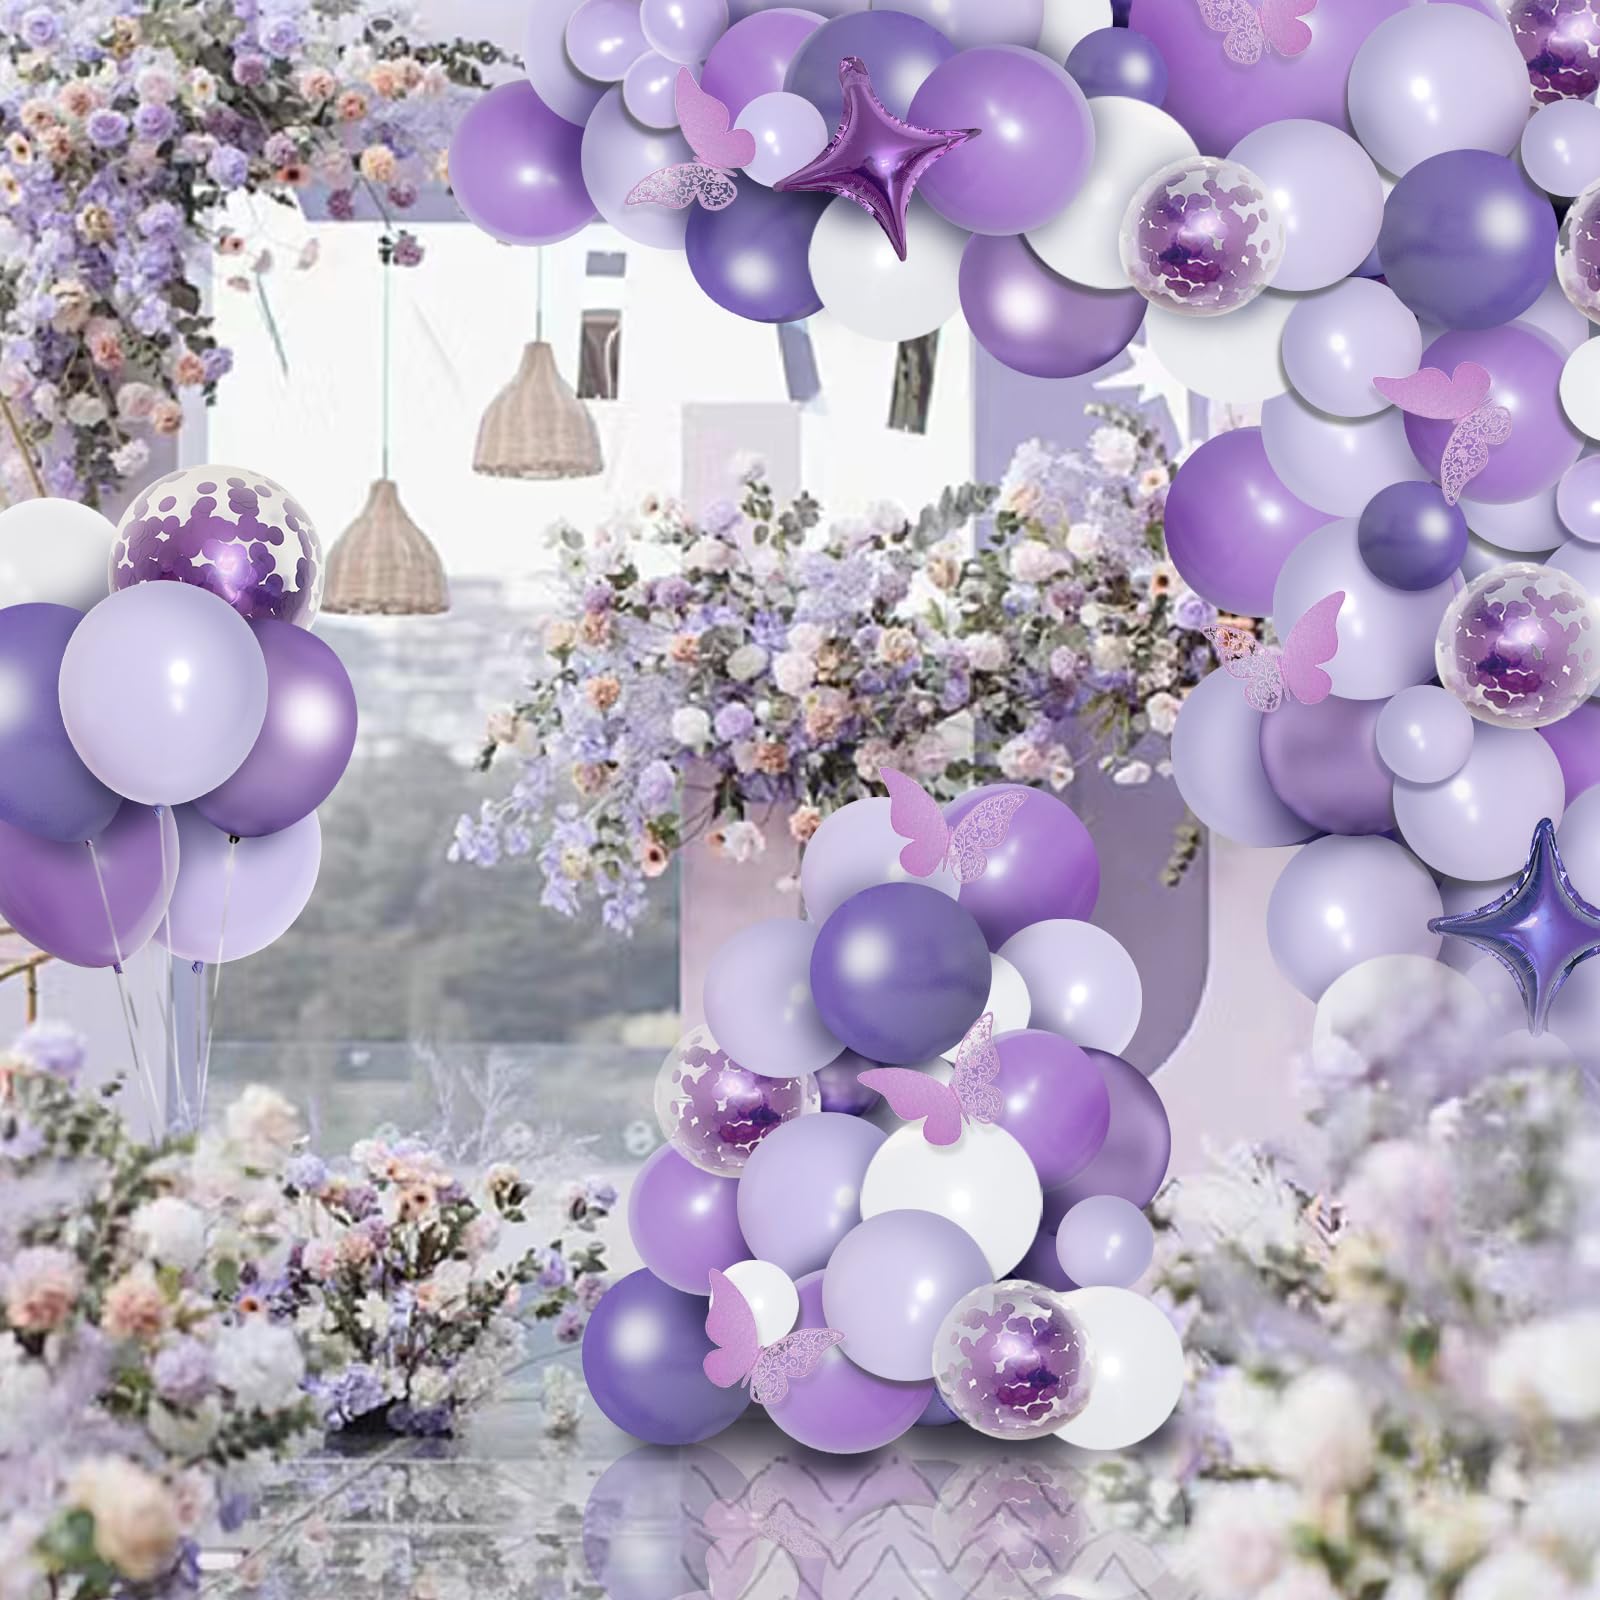 PERPAOL 150pcs Purple Balloon Garland Kit with Butterfly Stickers, Lavender White Macaron Metallic Purple Confetti Balloons Arch for Birthday Wedding Anniversary Sweet 16 Enchanted Forest Party Decor